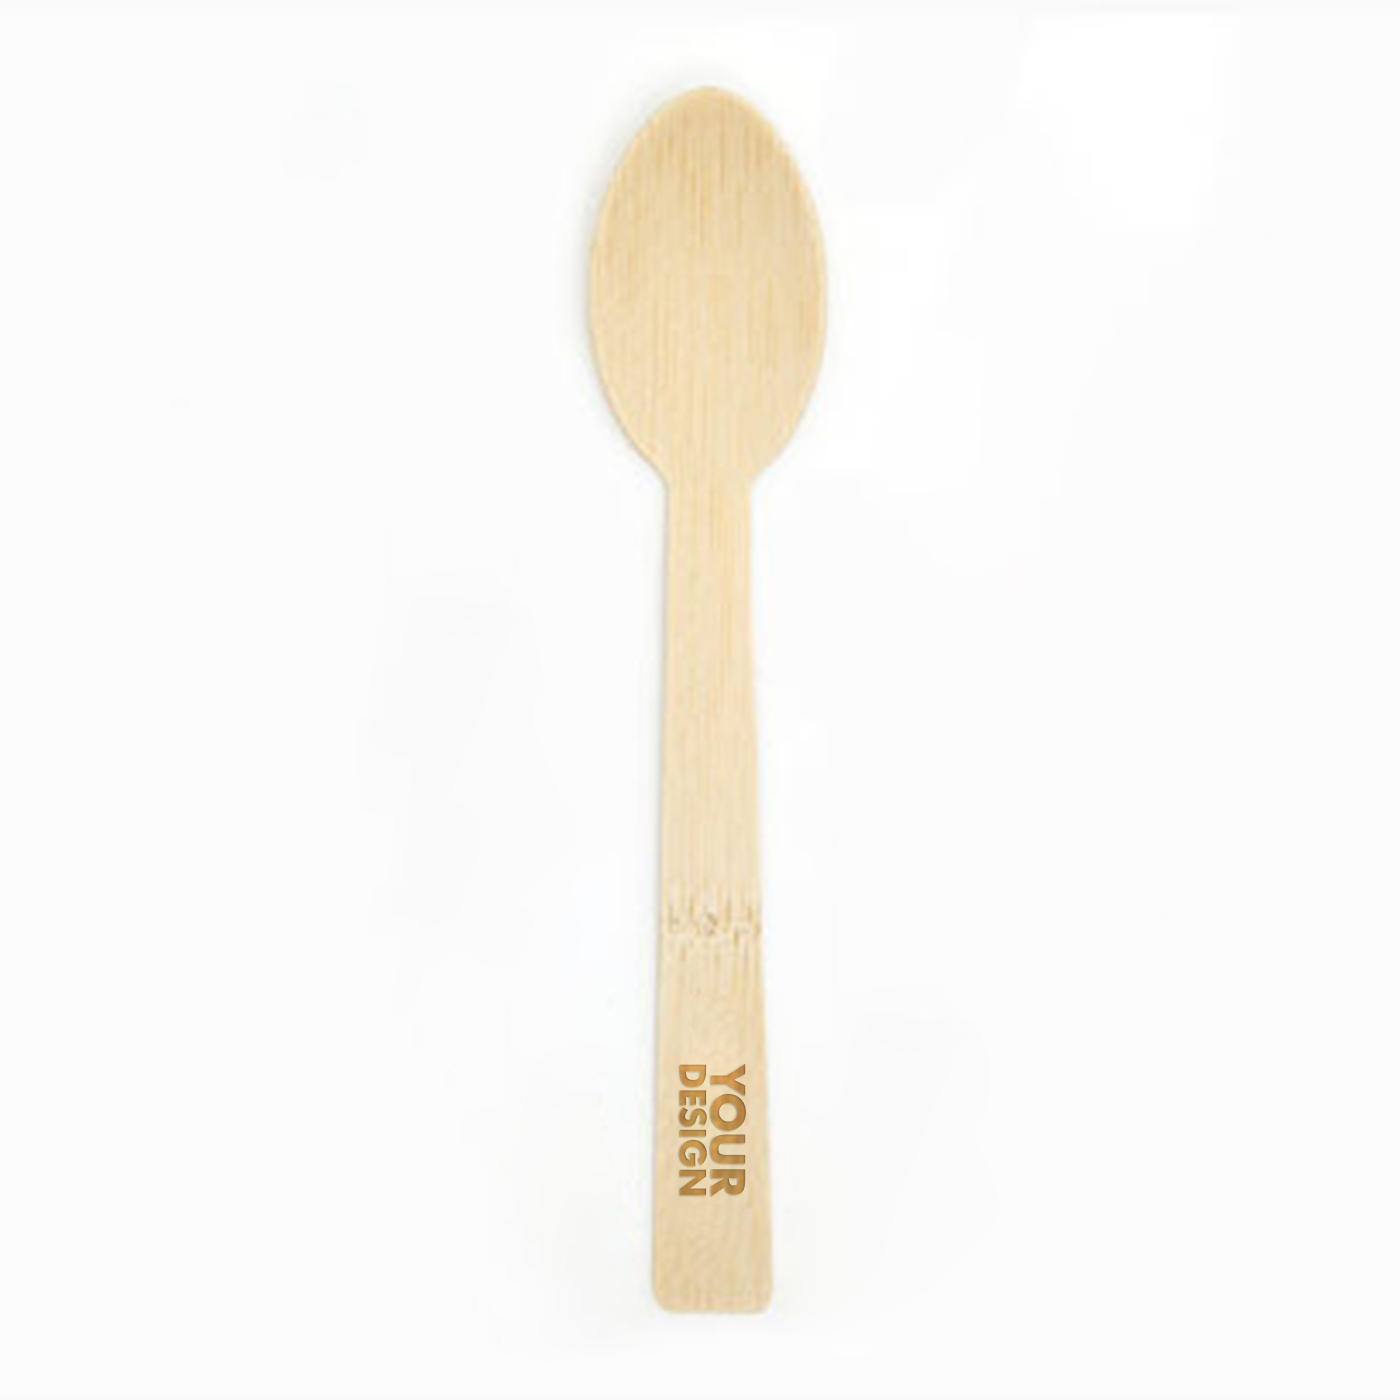 Biodegradable Disposable Bamboo Spoon1